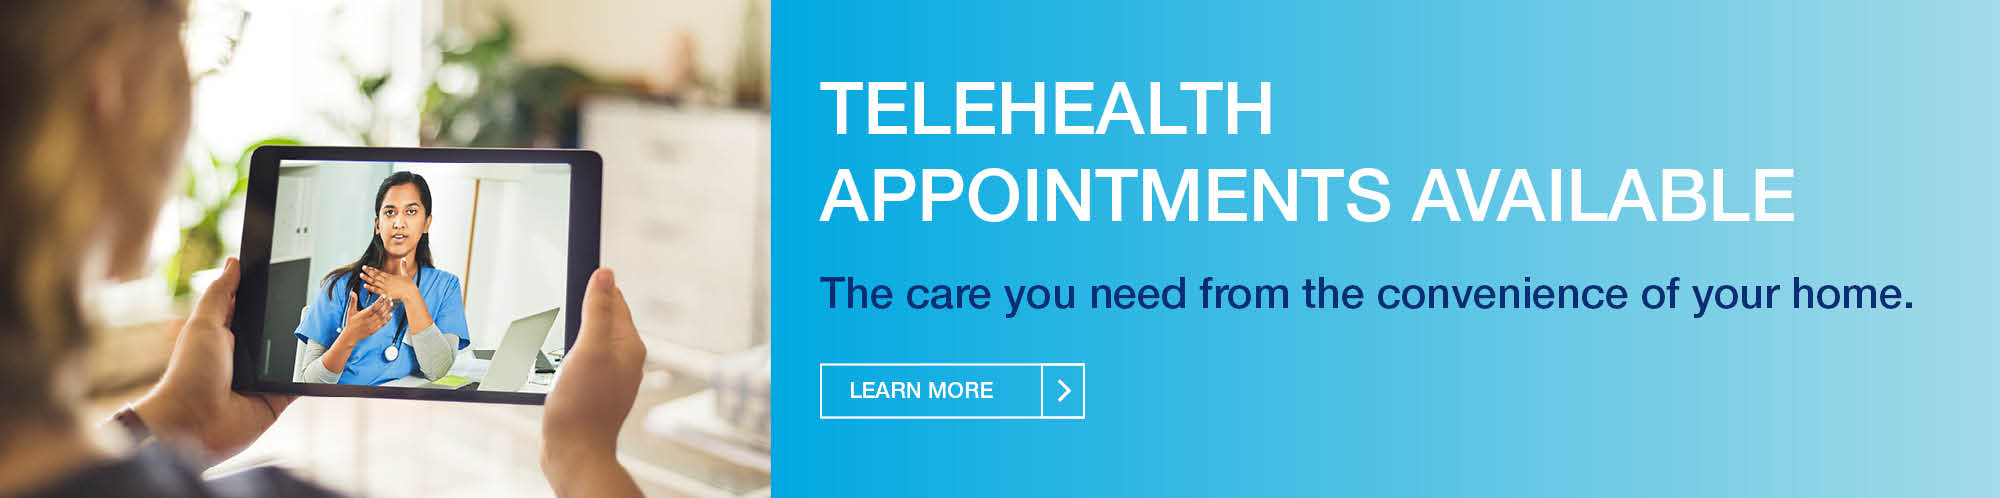 Telehealth Appointments Available